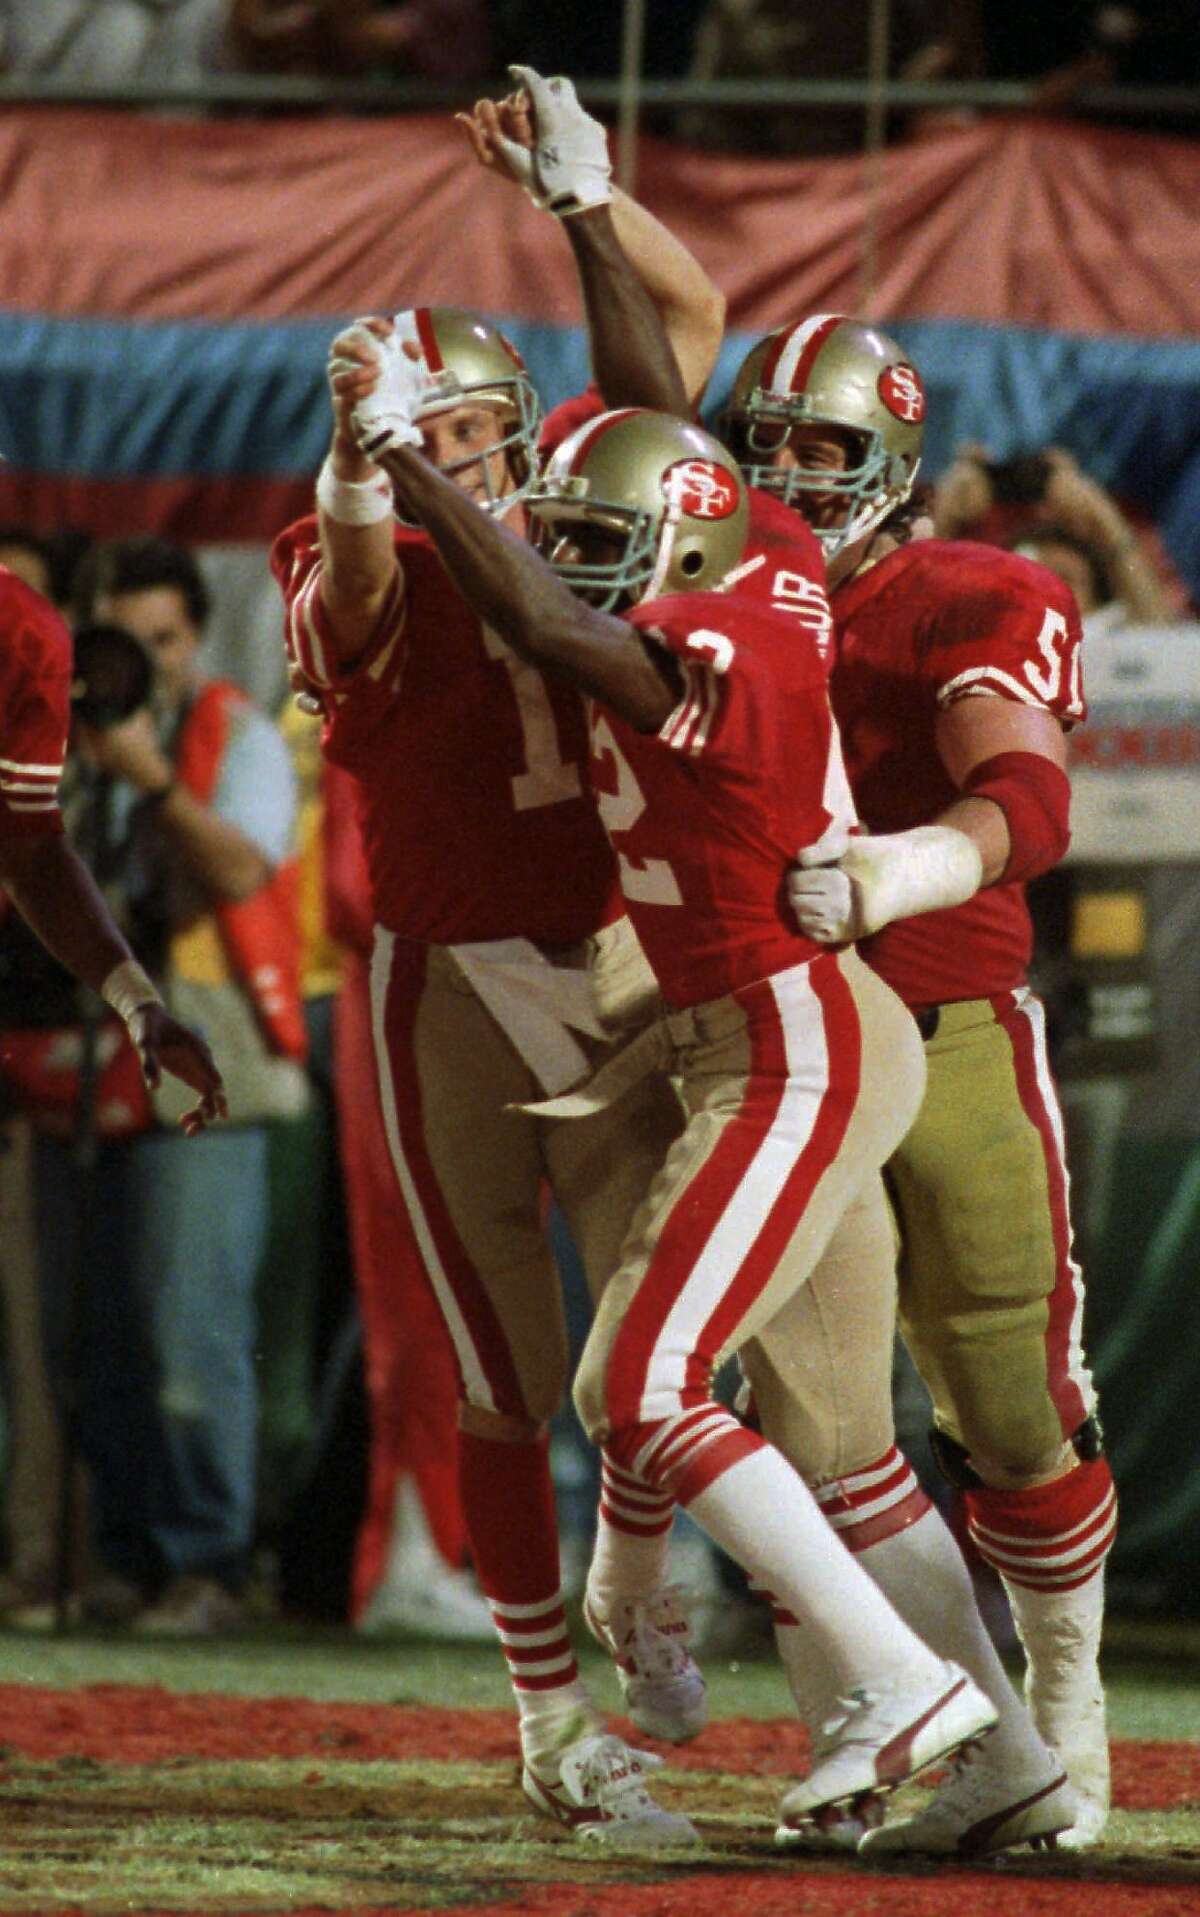 San Francisco 49ers quarterback Joe Montana (16) and wide receiver John Taylor (82) clasp hands after Montana's pass to Taylor at the end of the fourth quarter resulted in a 20-16 victory over the Cincinnati Bengals at Super Bowl XXIII Jan.22, 1989 in Miami. (AP Photo/Rusty Kennedy)